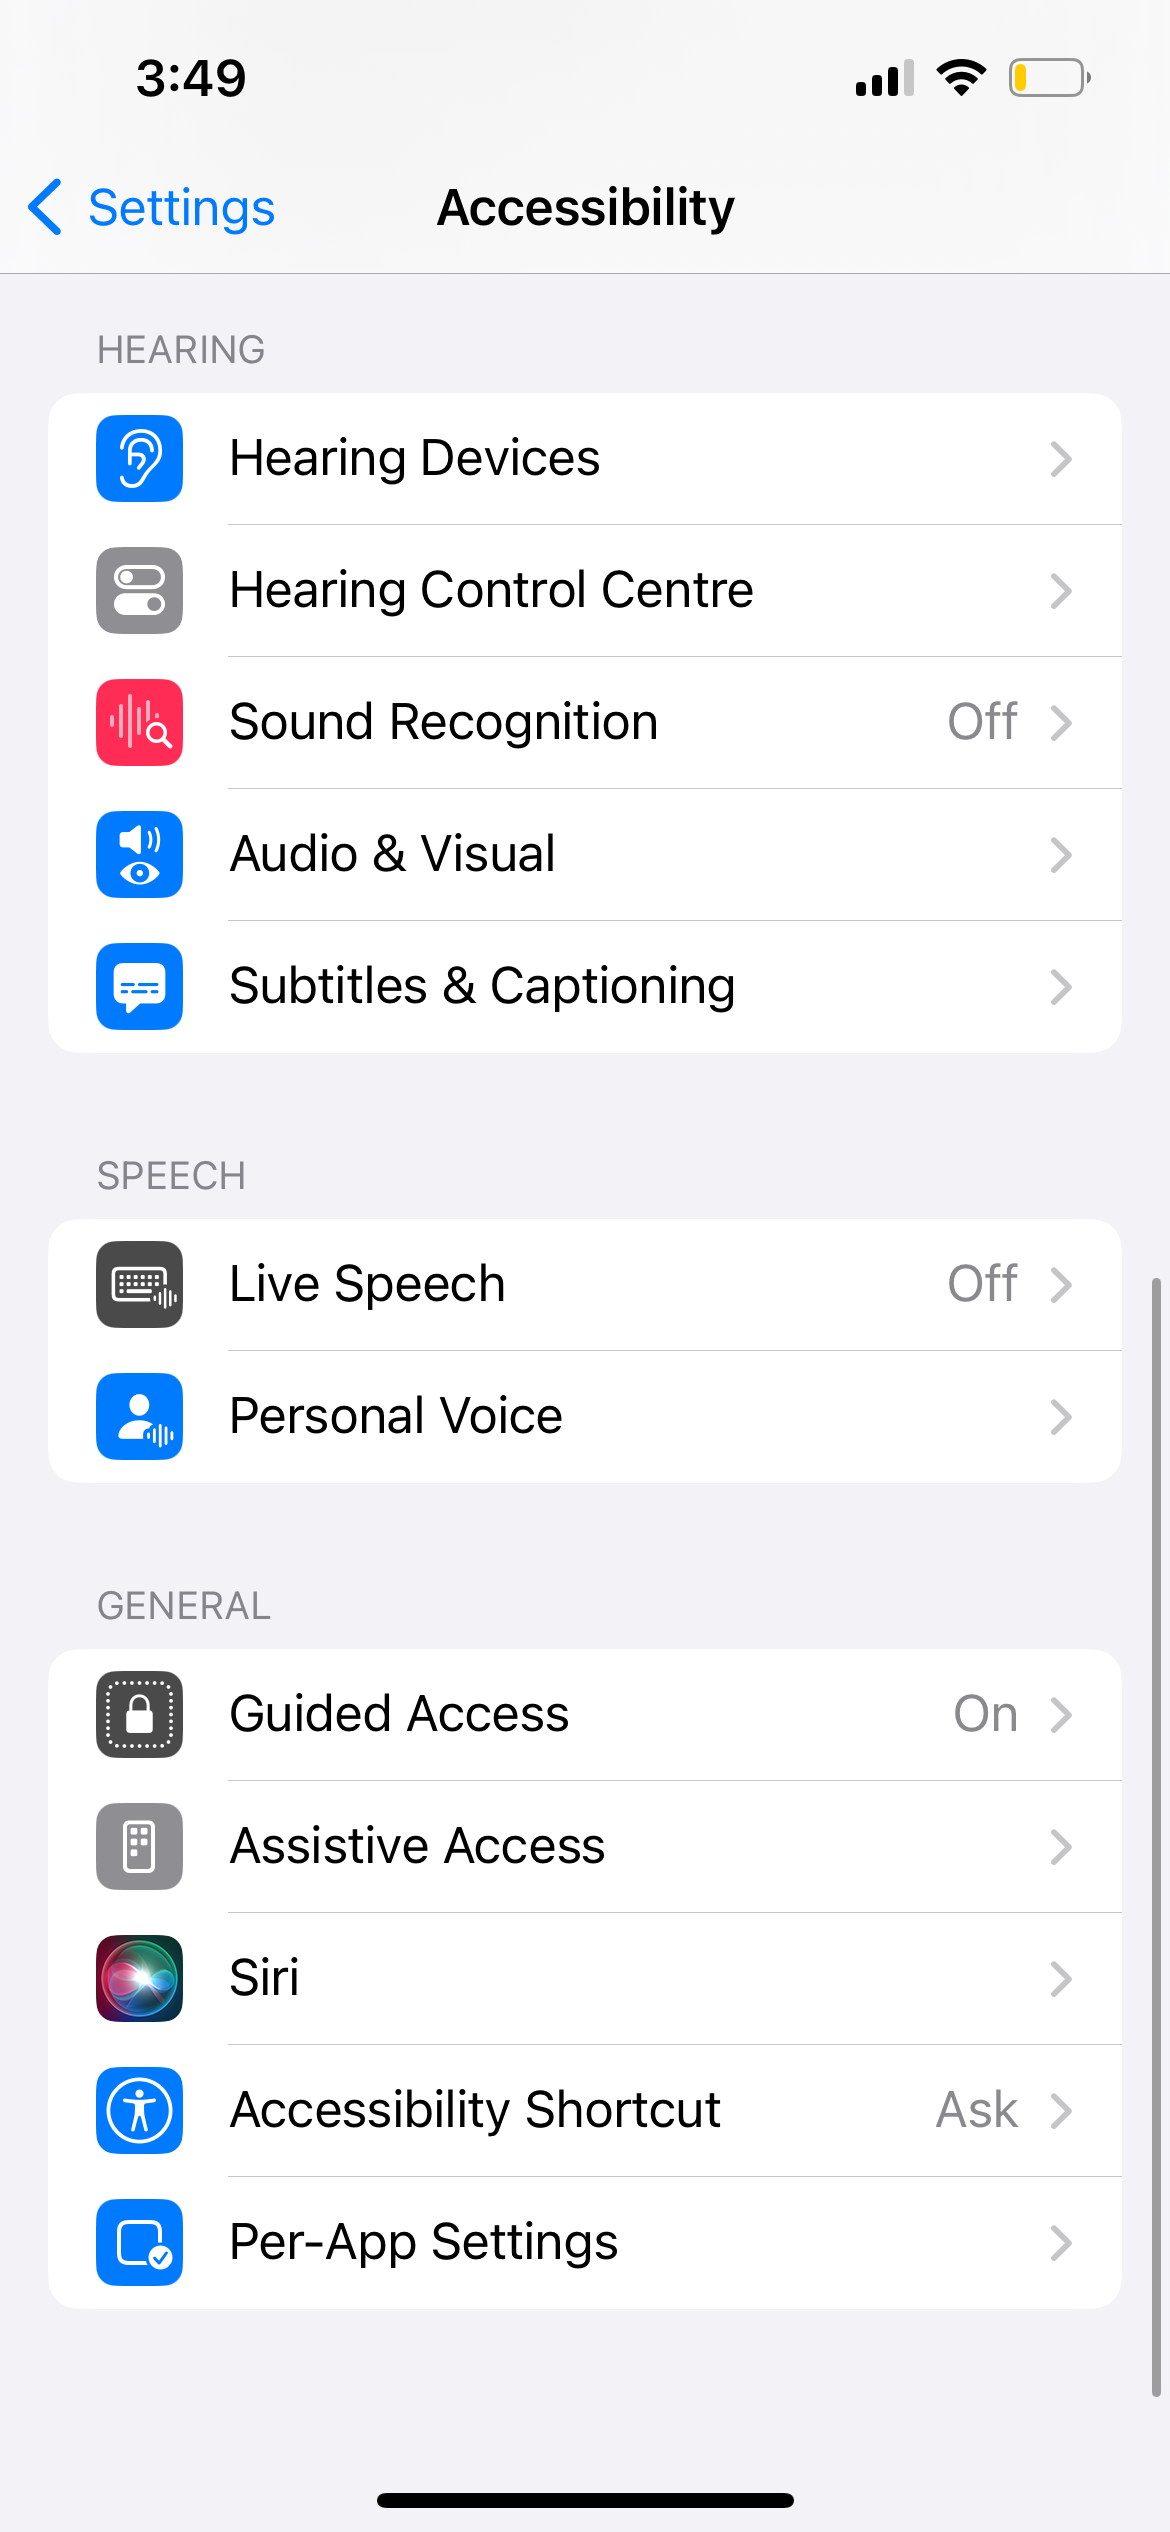 iphone accessibility settings showing hearing, speech, and general categories